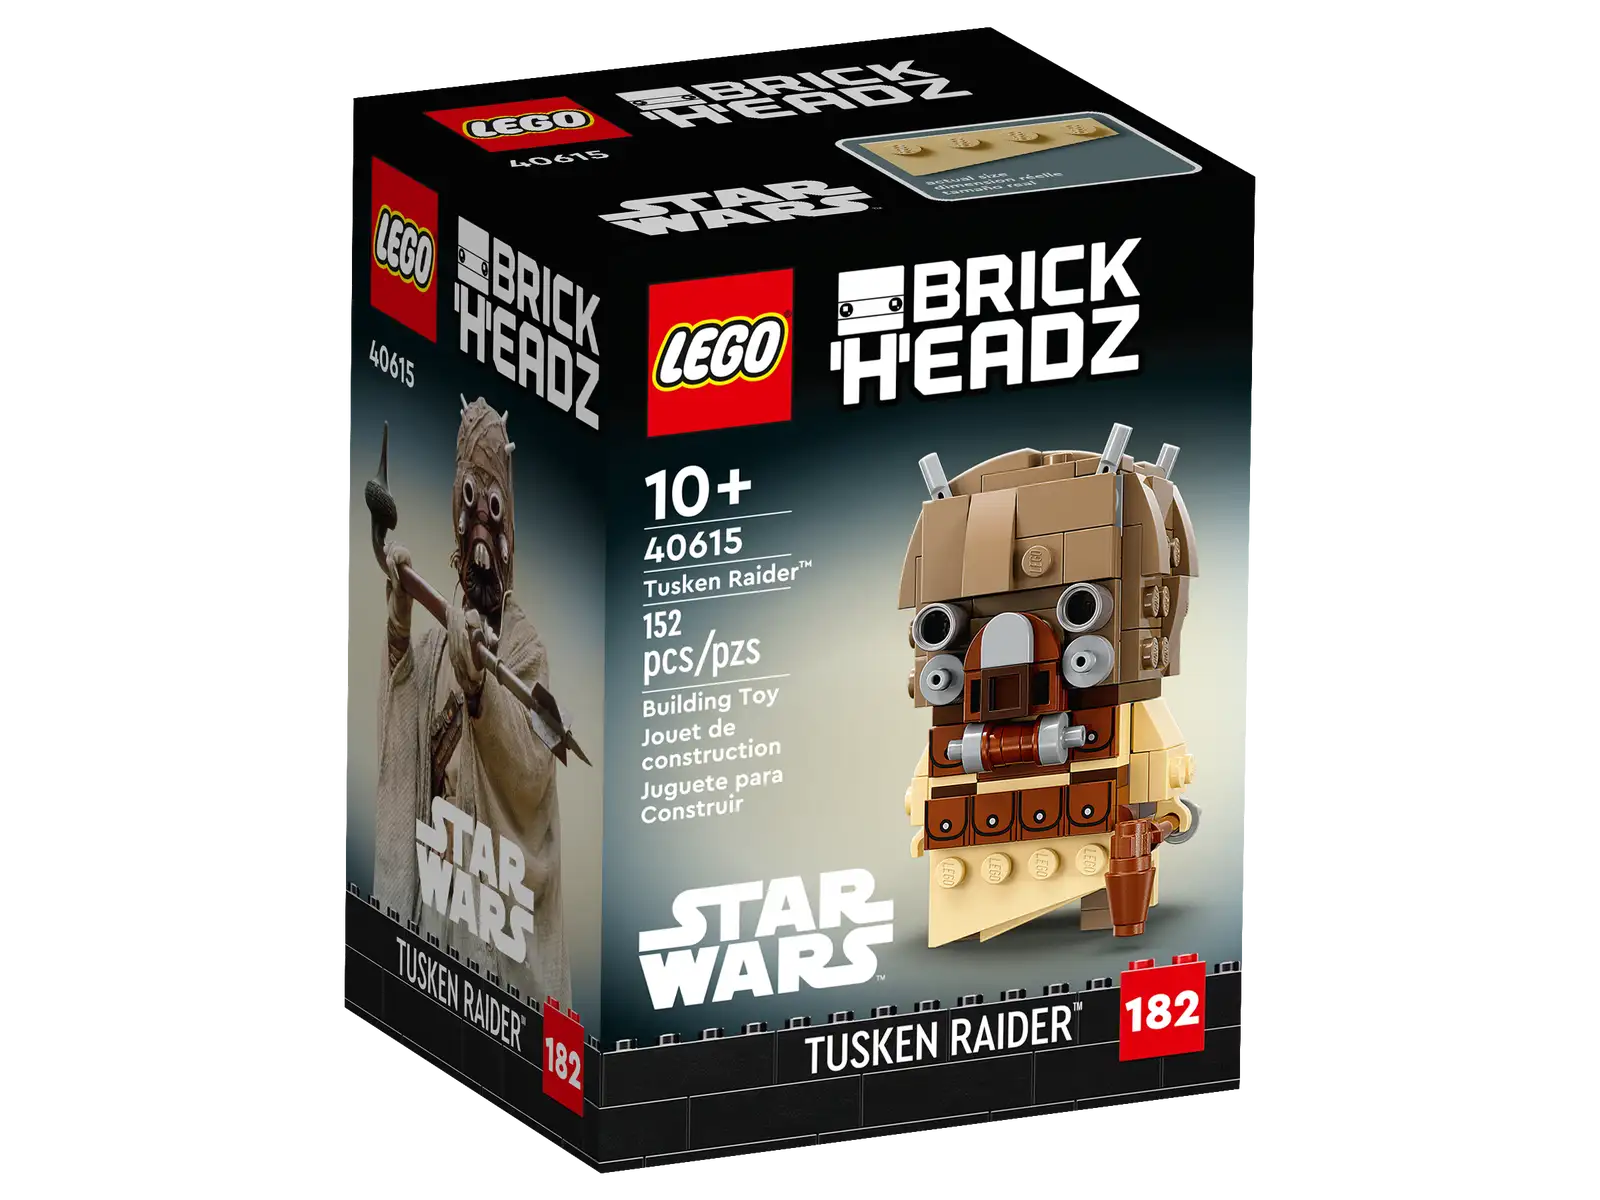 Star Wars™ fans can relive thrilling scenes on Tatooine as they build a LEGO® BrickHeadz™ Tusken Raider (40615) character. With authentic details such as the Star Wars: A New Hope outfit, plus a gaffi stick and blaster, it makes a cool anytime gift for fans aged 10 and up or any Star Wars collector. The brick-built character comes with a baseplate and will make a striking addition to any display of Star Wars construction toys. A Tusken Raider in LEGO® BrickHeadz™ style – A buildable LEGO BrickHeadz Tusken Raider (40615) character in a Star Wars: A New Hope outfit, with a gaffi stick and a blaster Display piece – This 152-piece LEGO® Star Wars™ building set for kids aged 10 and up comes with step-by-step building instructions and includes a baseplate for display Gift idea – This Star Wars™ building toy measures over 3 in. (8 cm) high, 2 in. (5 cm) wide and 2 in. (5 cm) deep. Give it to a Star Wars fan as a birthday present, holiday gift or surprise treat